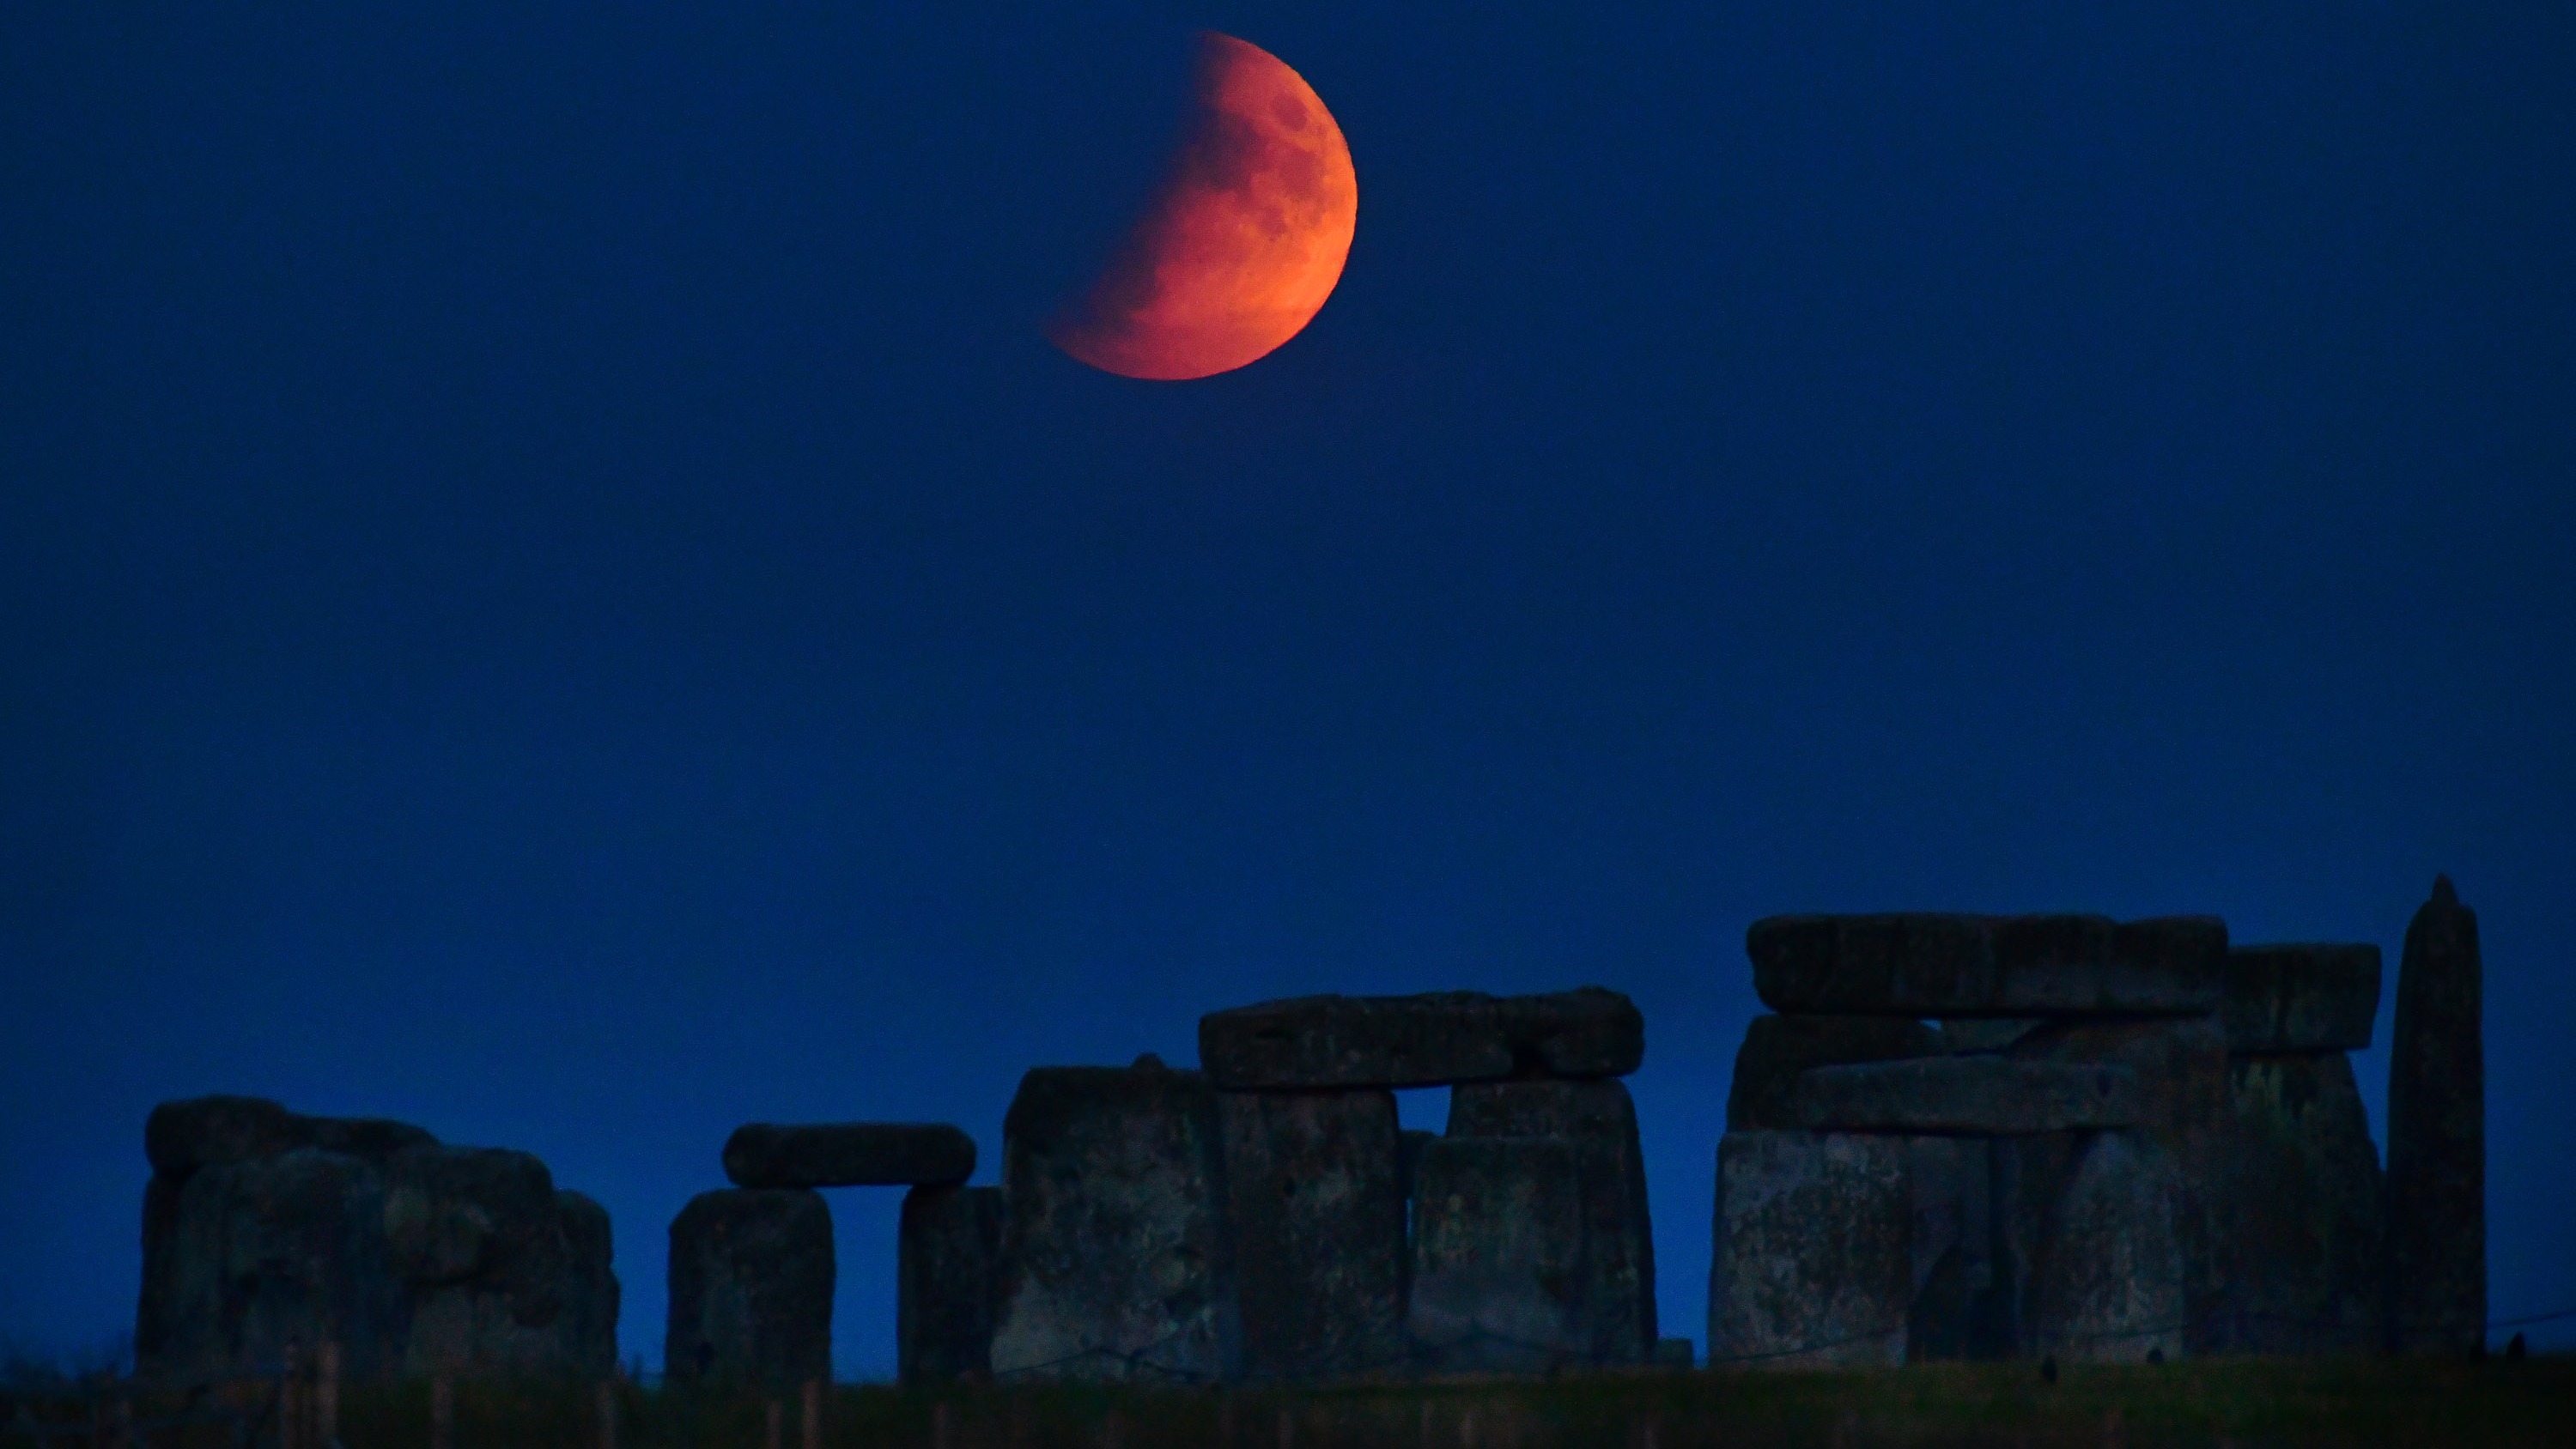 red crescent moon rises over stones of stonehenge barely visible in deep shadow.  the sky is dark blue